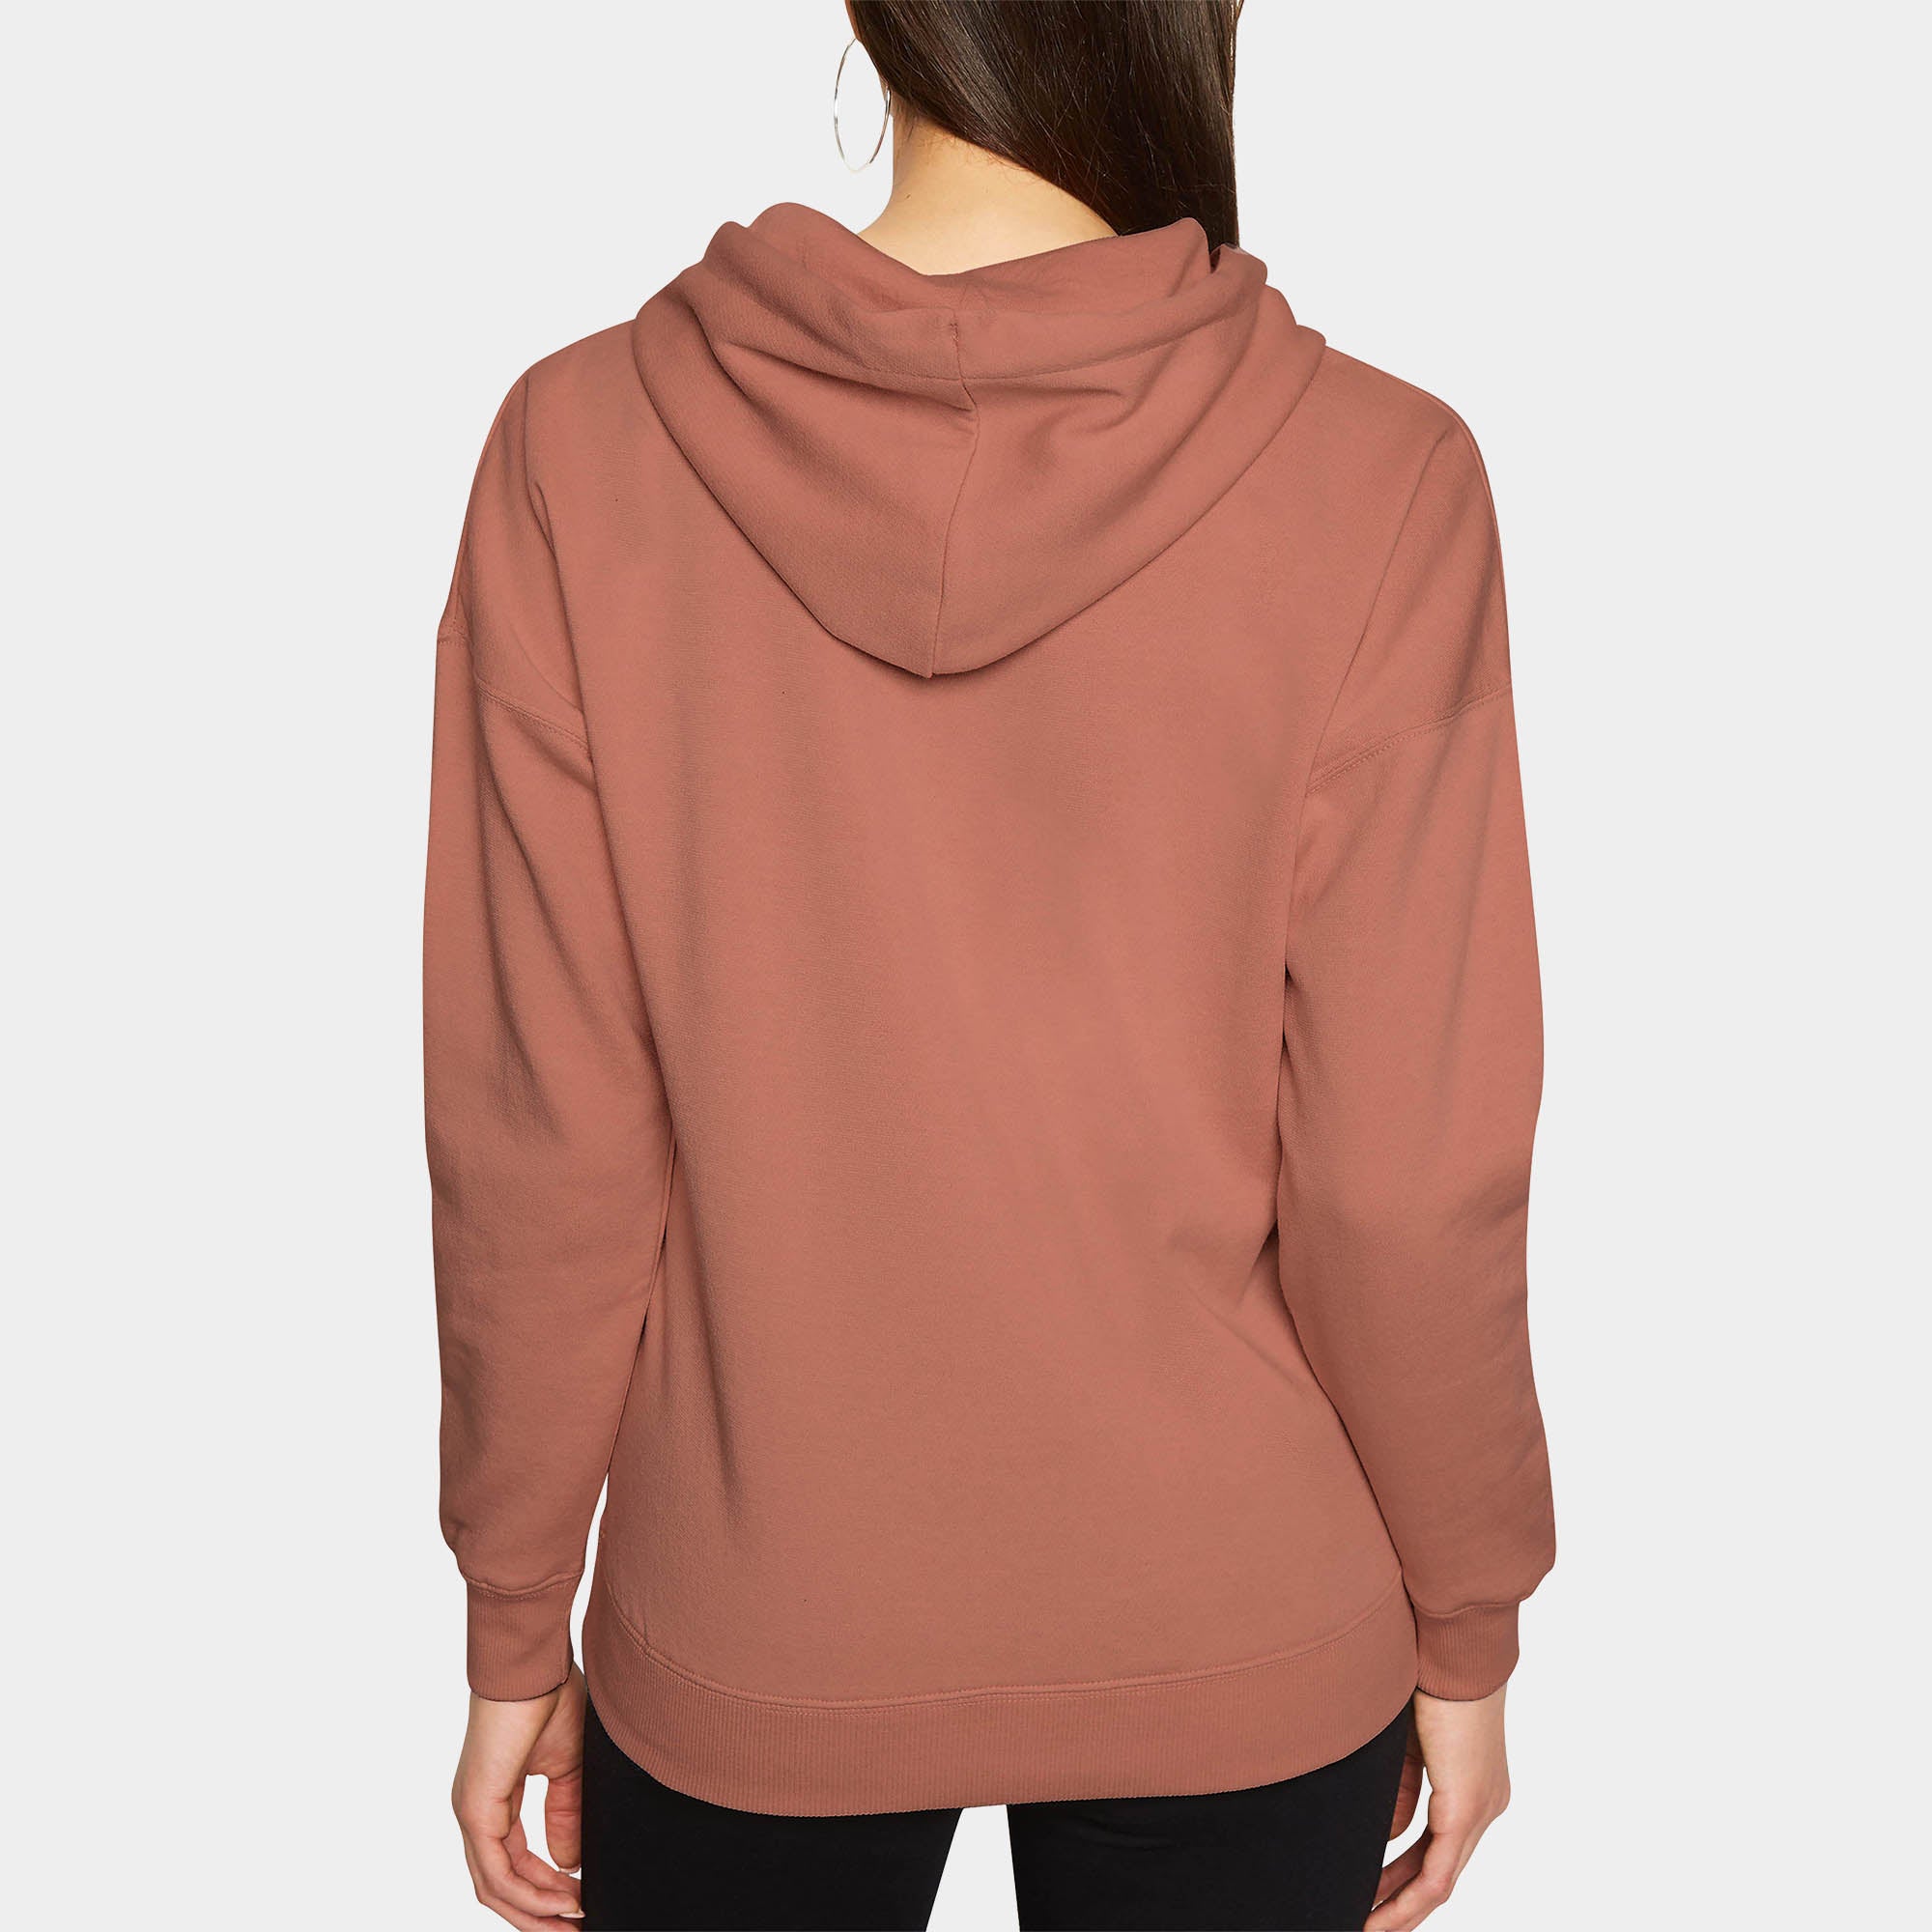 french terry hoodie_french terry sweatshirt_terry hoodie_terry sweatshirt_j crew french terry hoodie_women hoodie_cropped hoodie_sweatshirts for women_Dusty Rose